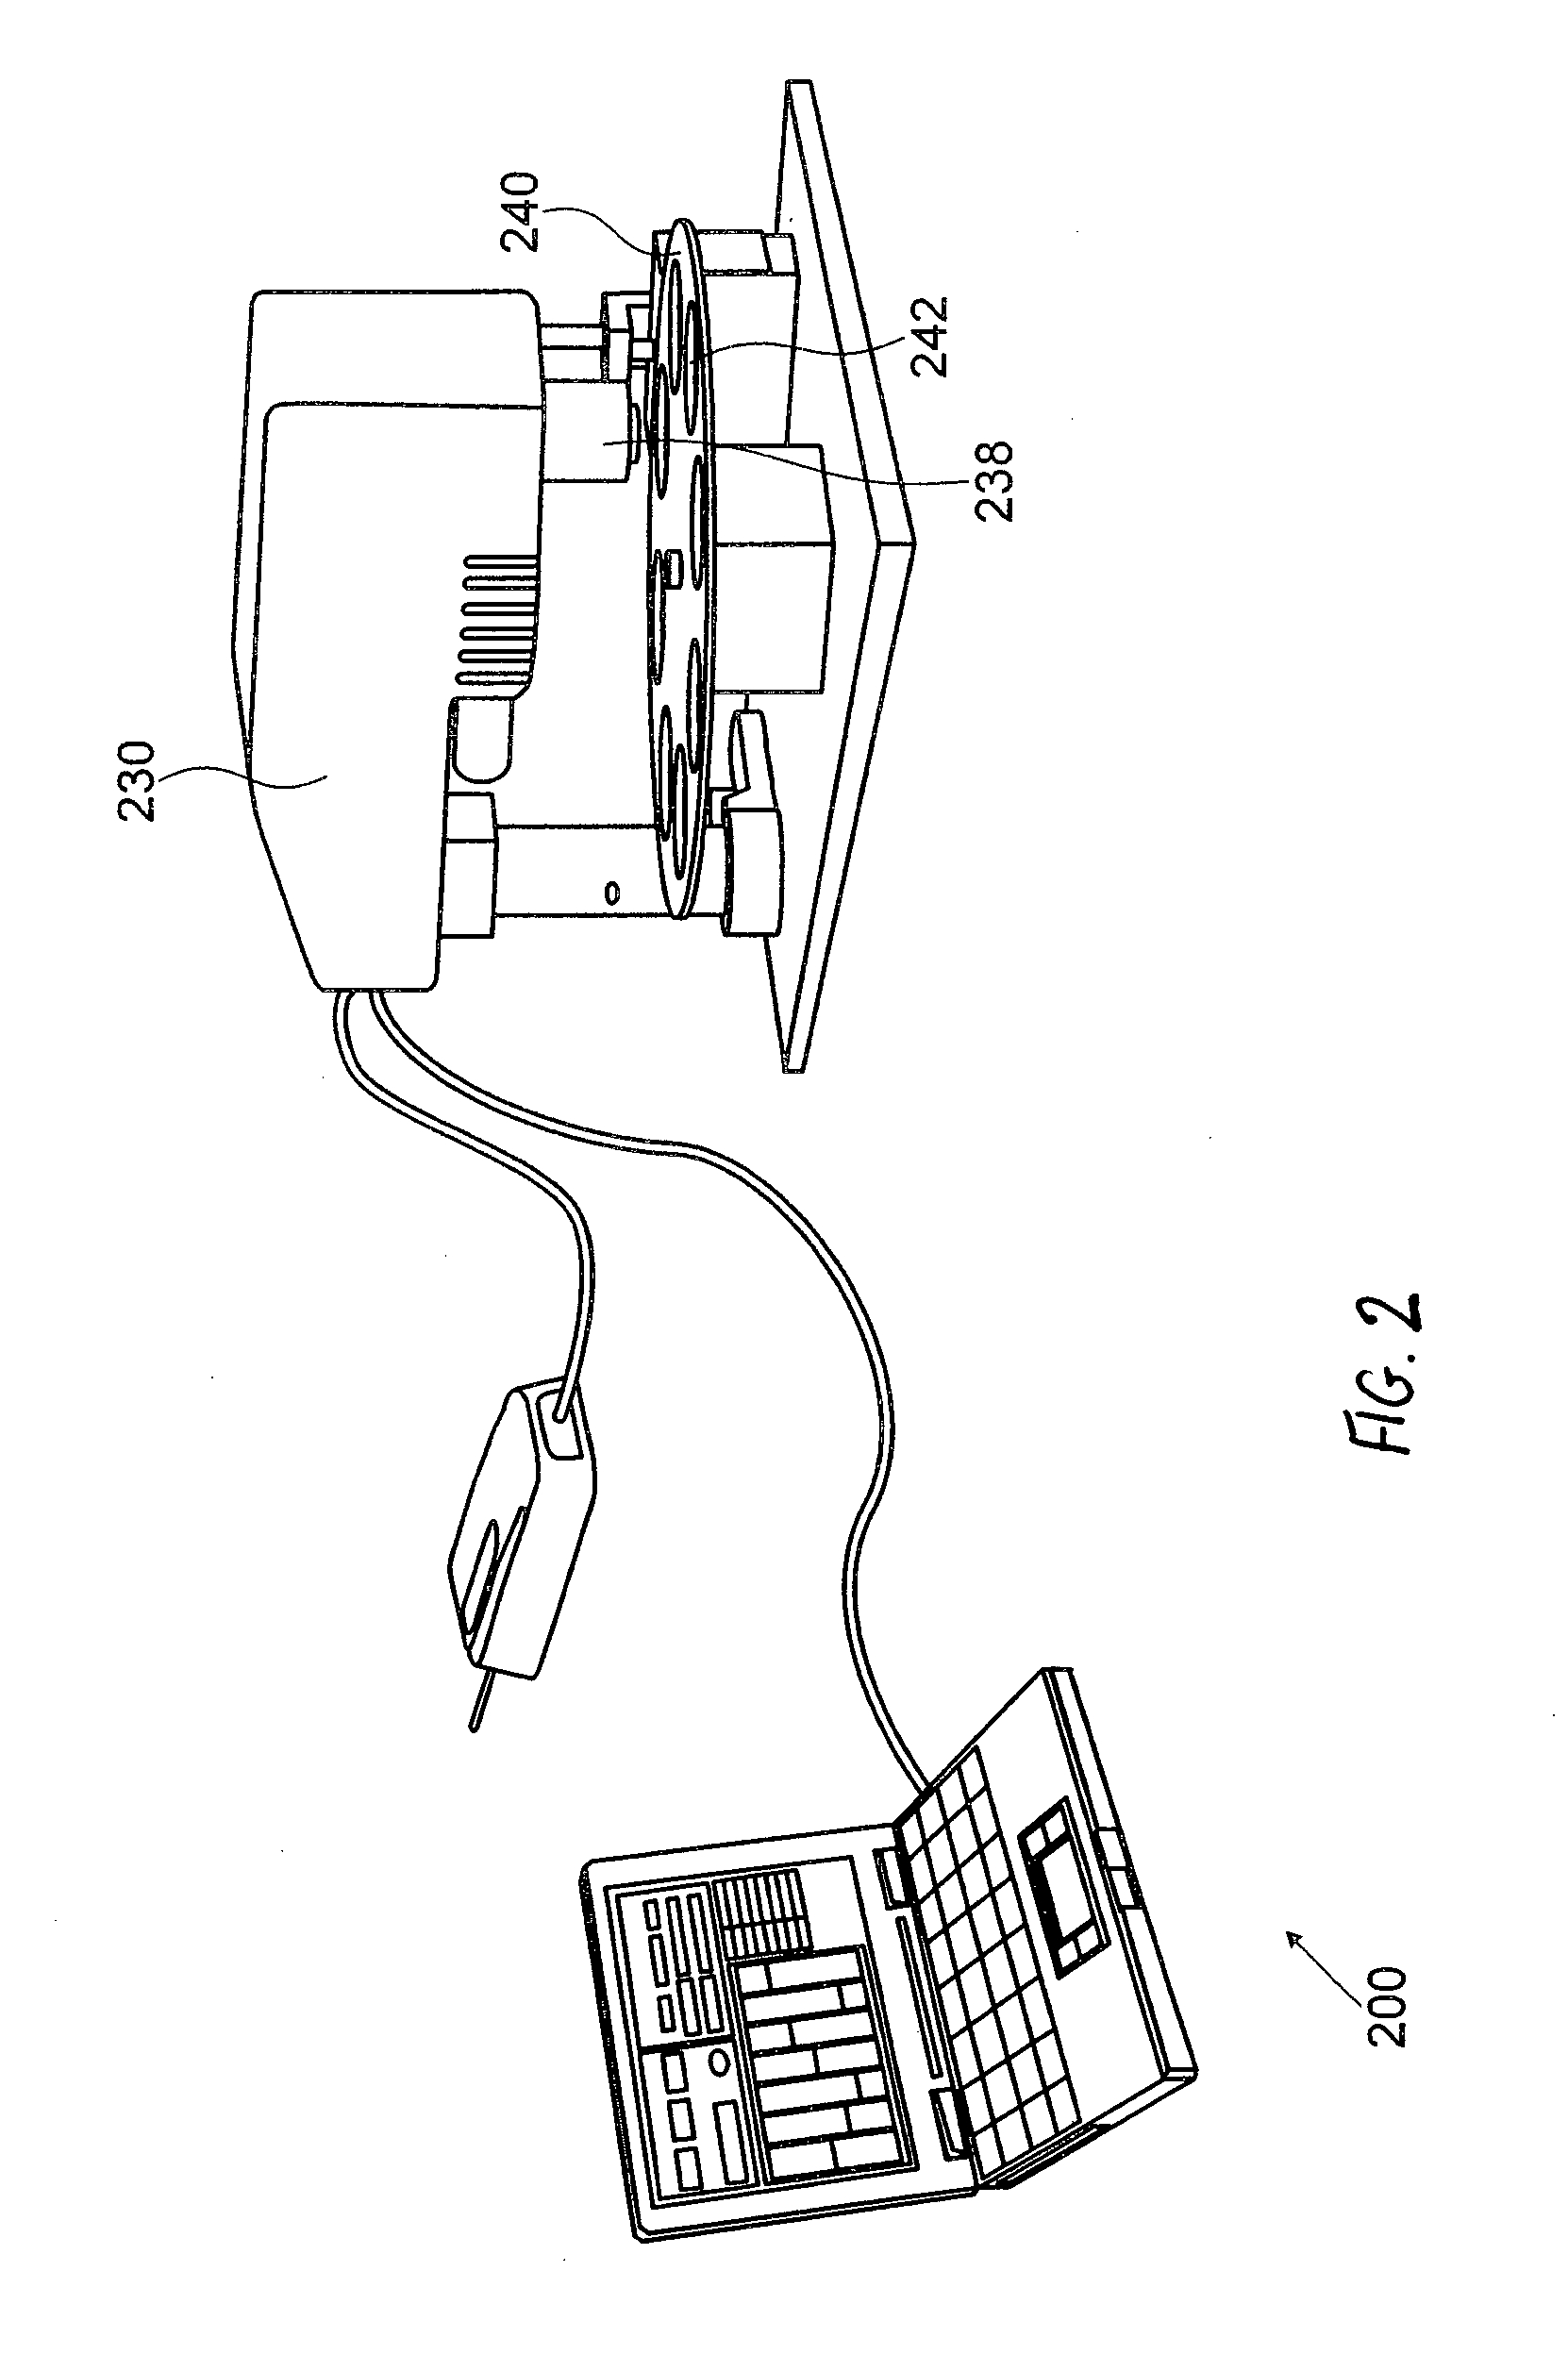 Device, system and method for rapid determination of a medical condition